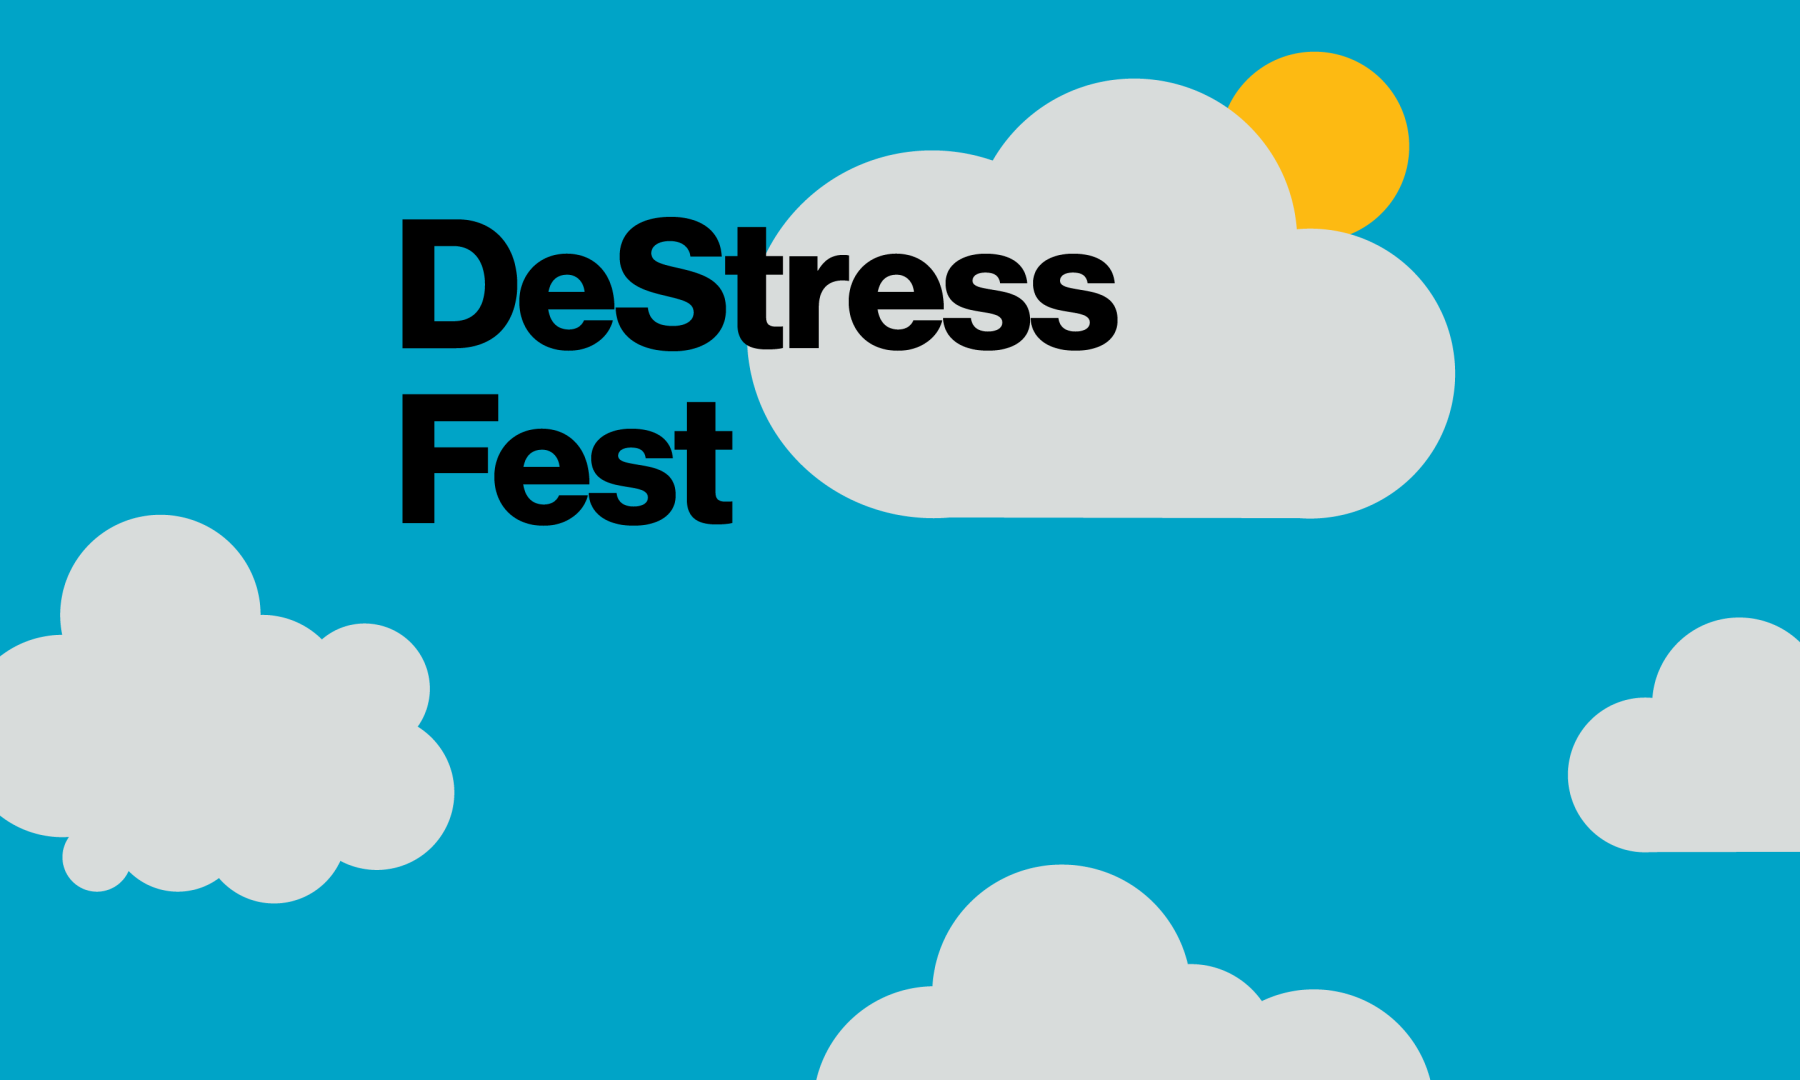 Image of clouds with the words Destress Fest